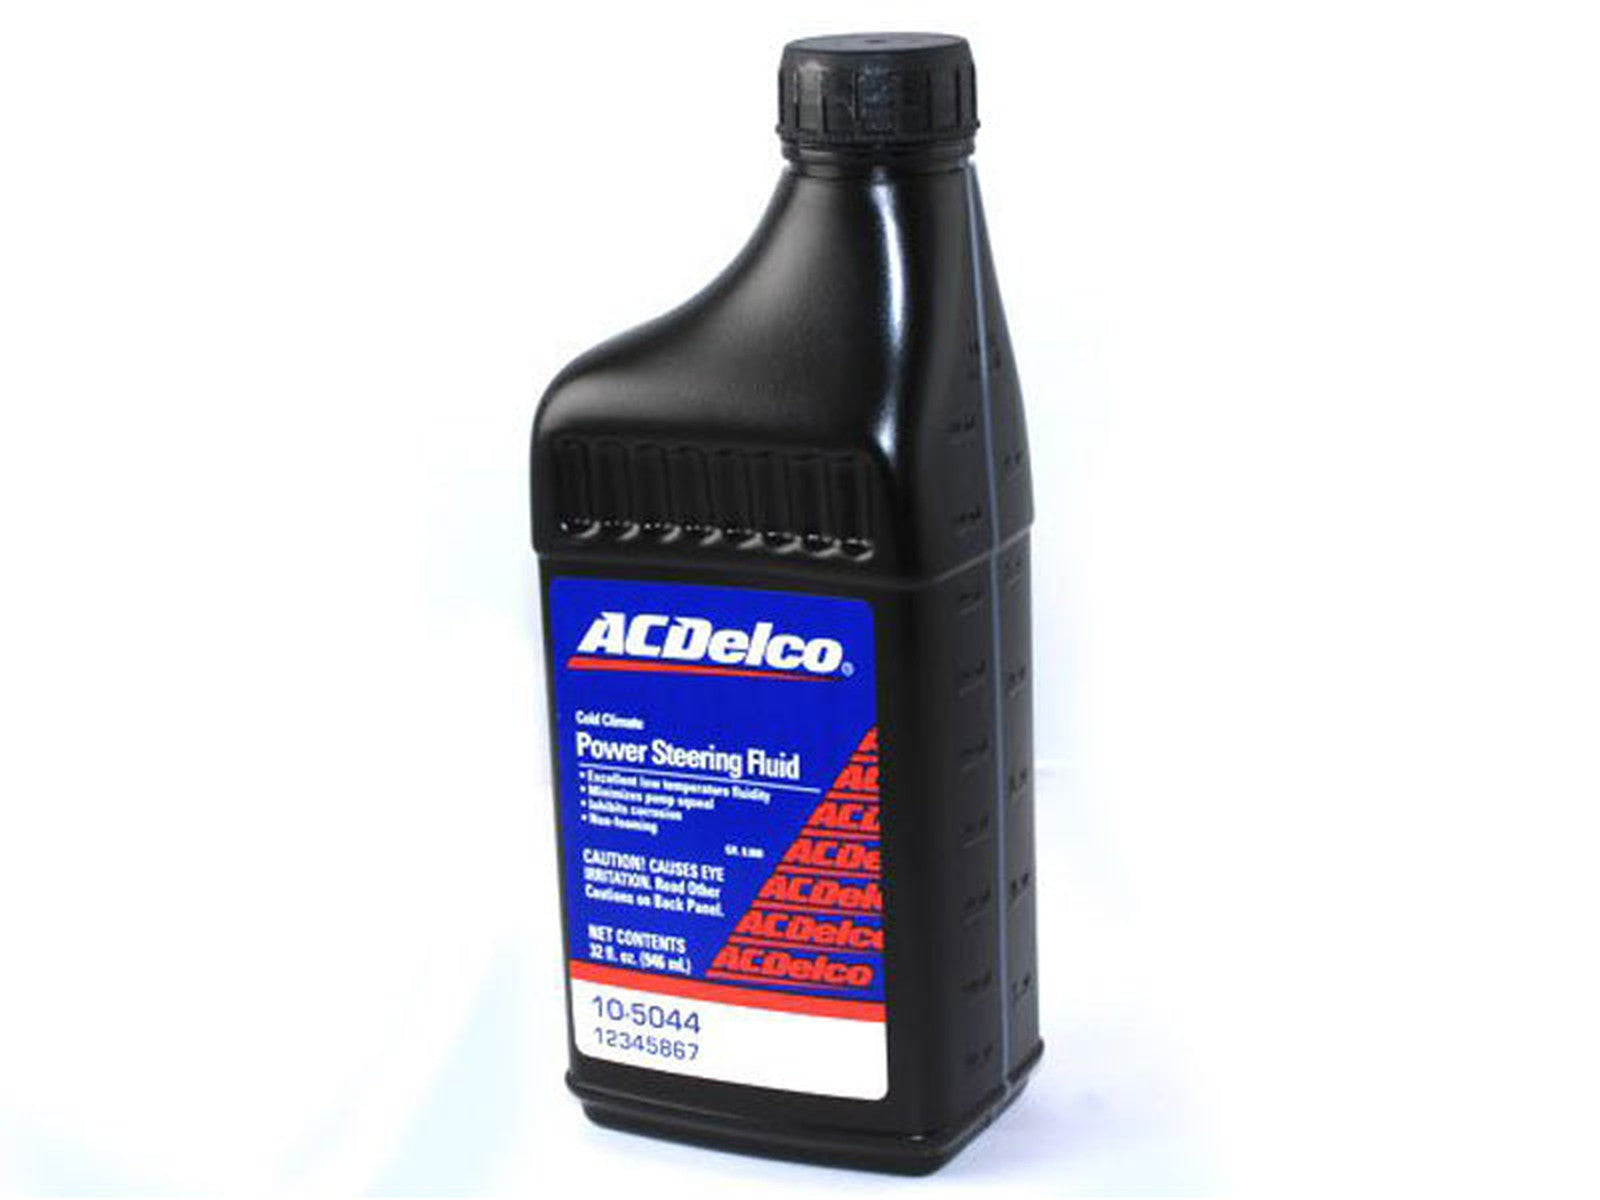 ACDelco 12345867 OE Cold Climate Power Steering Fluid, 32oz, 2001